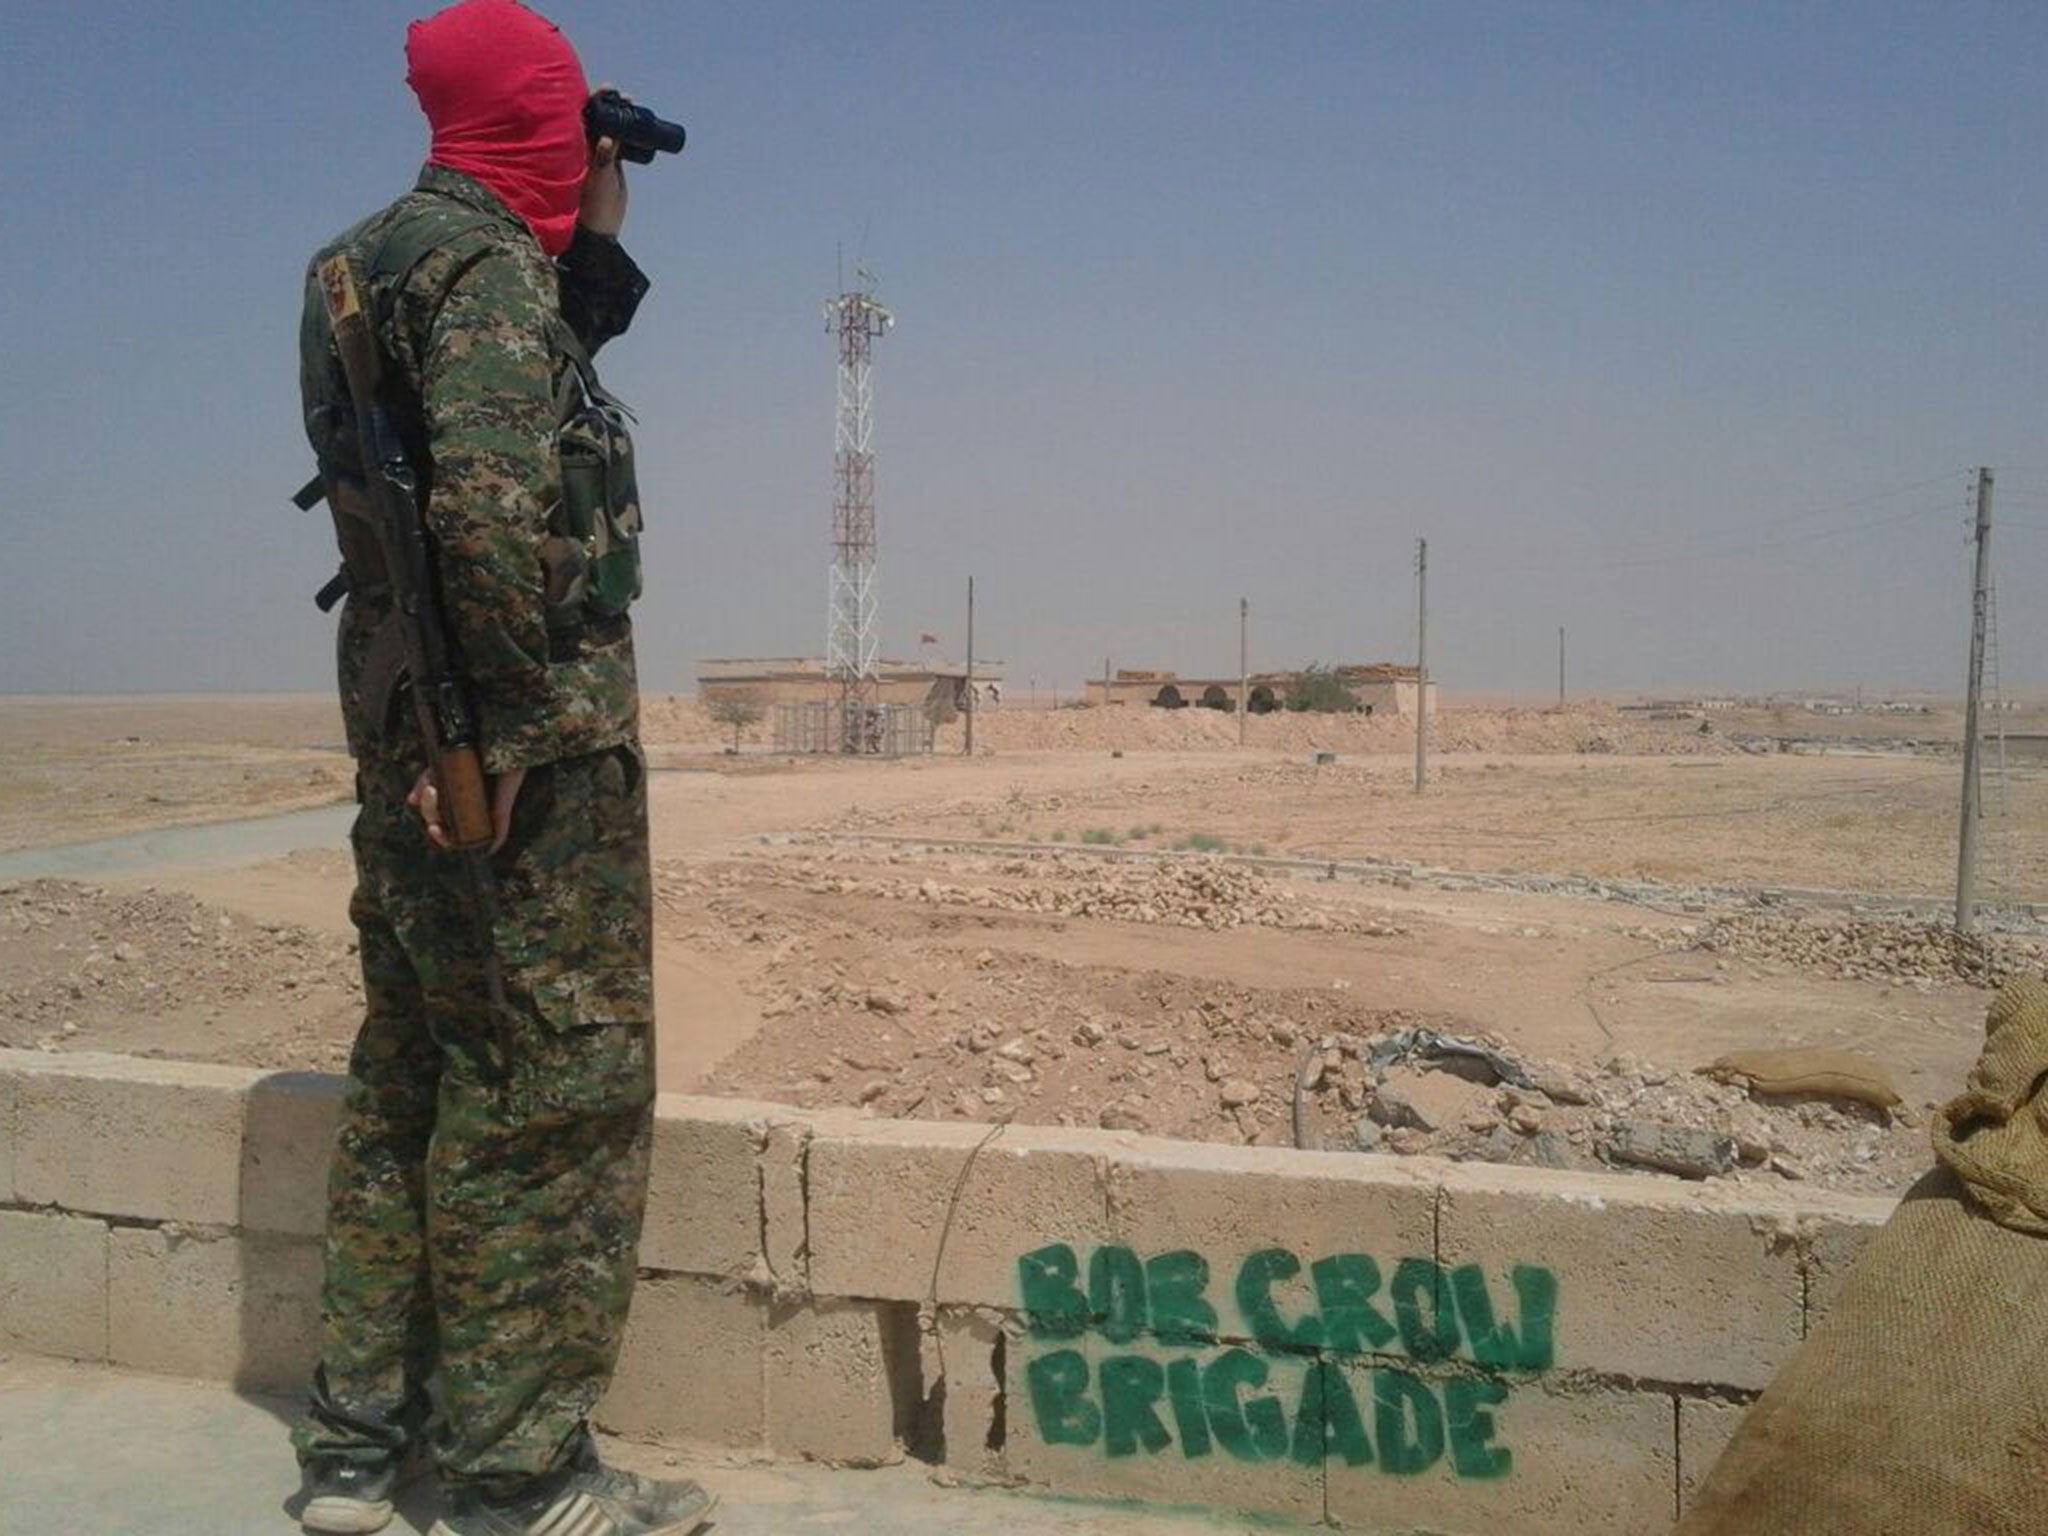 A member of the Bob Crow Brigade keeping watch in northern Syria